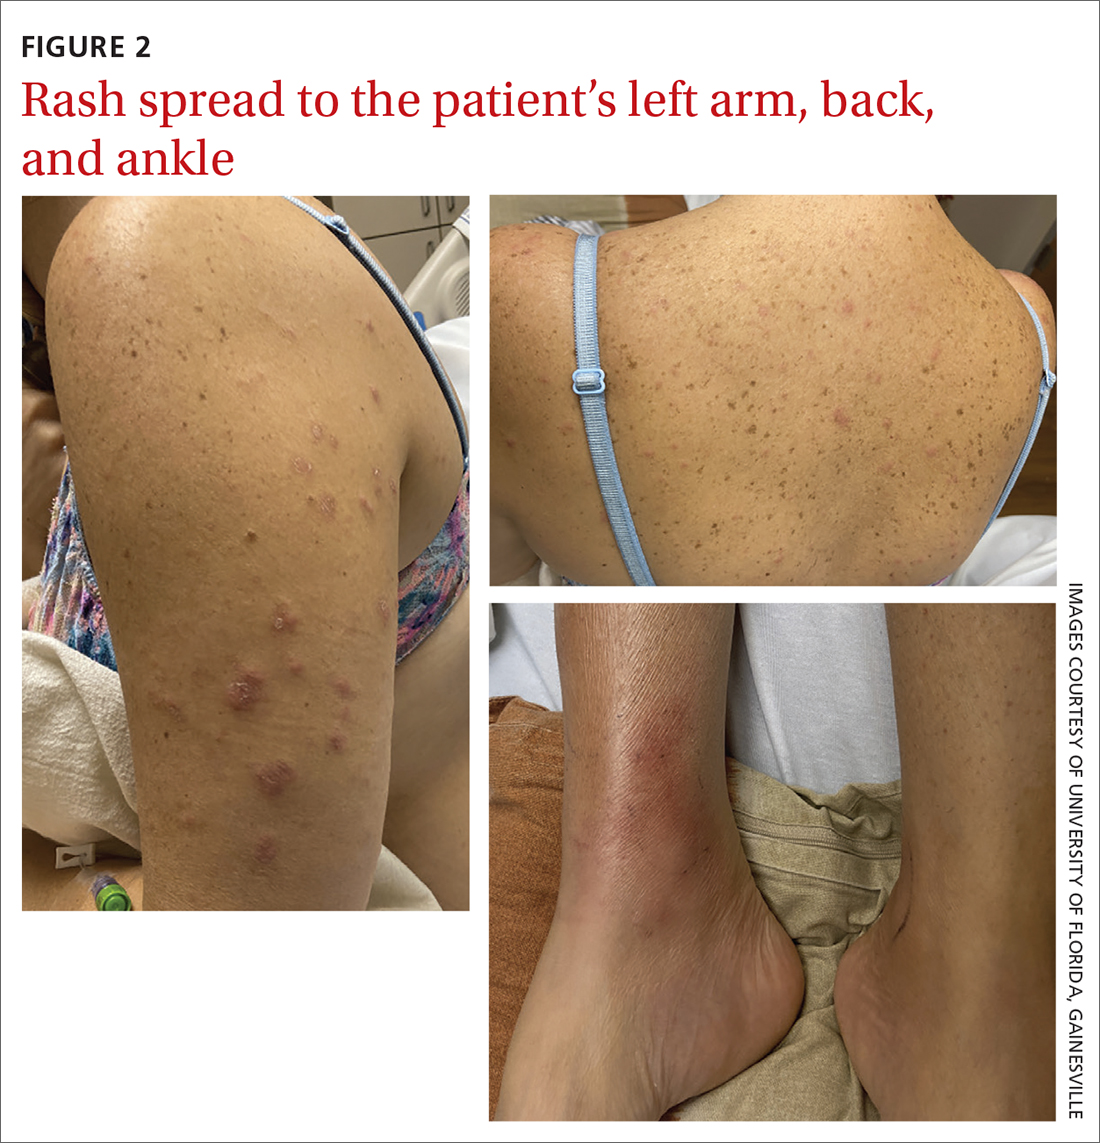 Rash spread to the patient’s left arm, back, and ankle